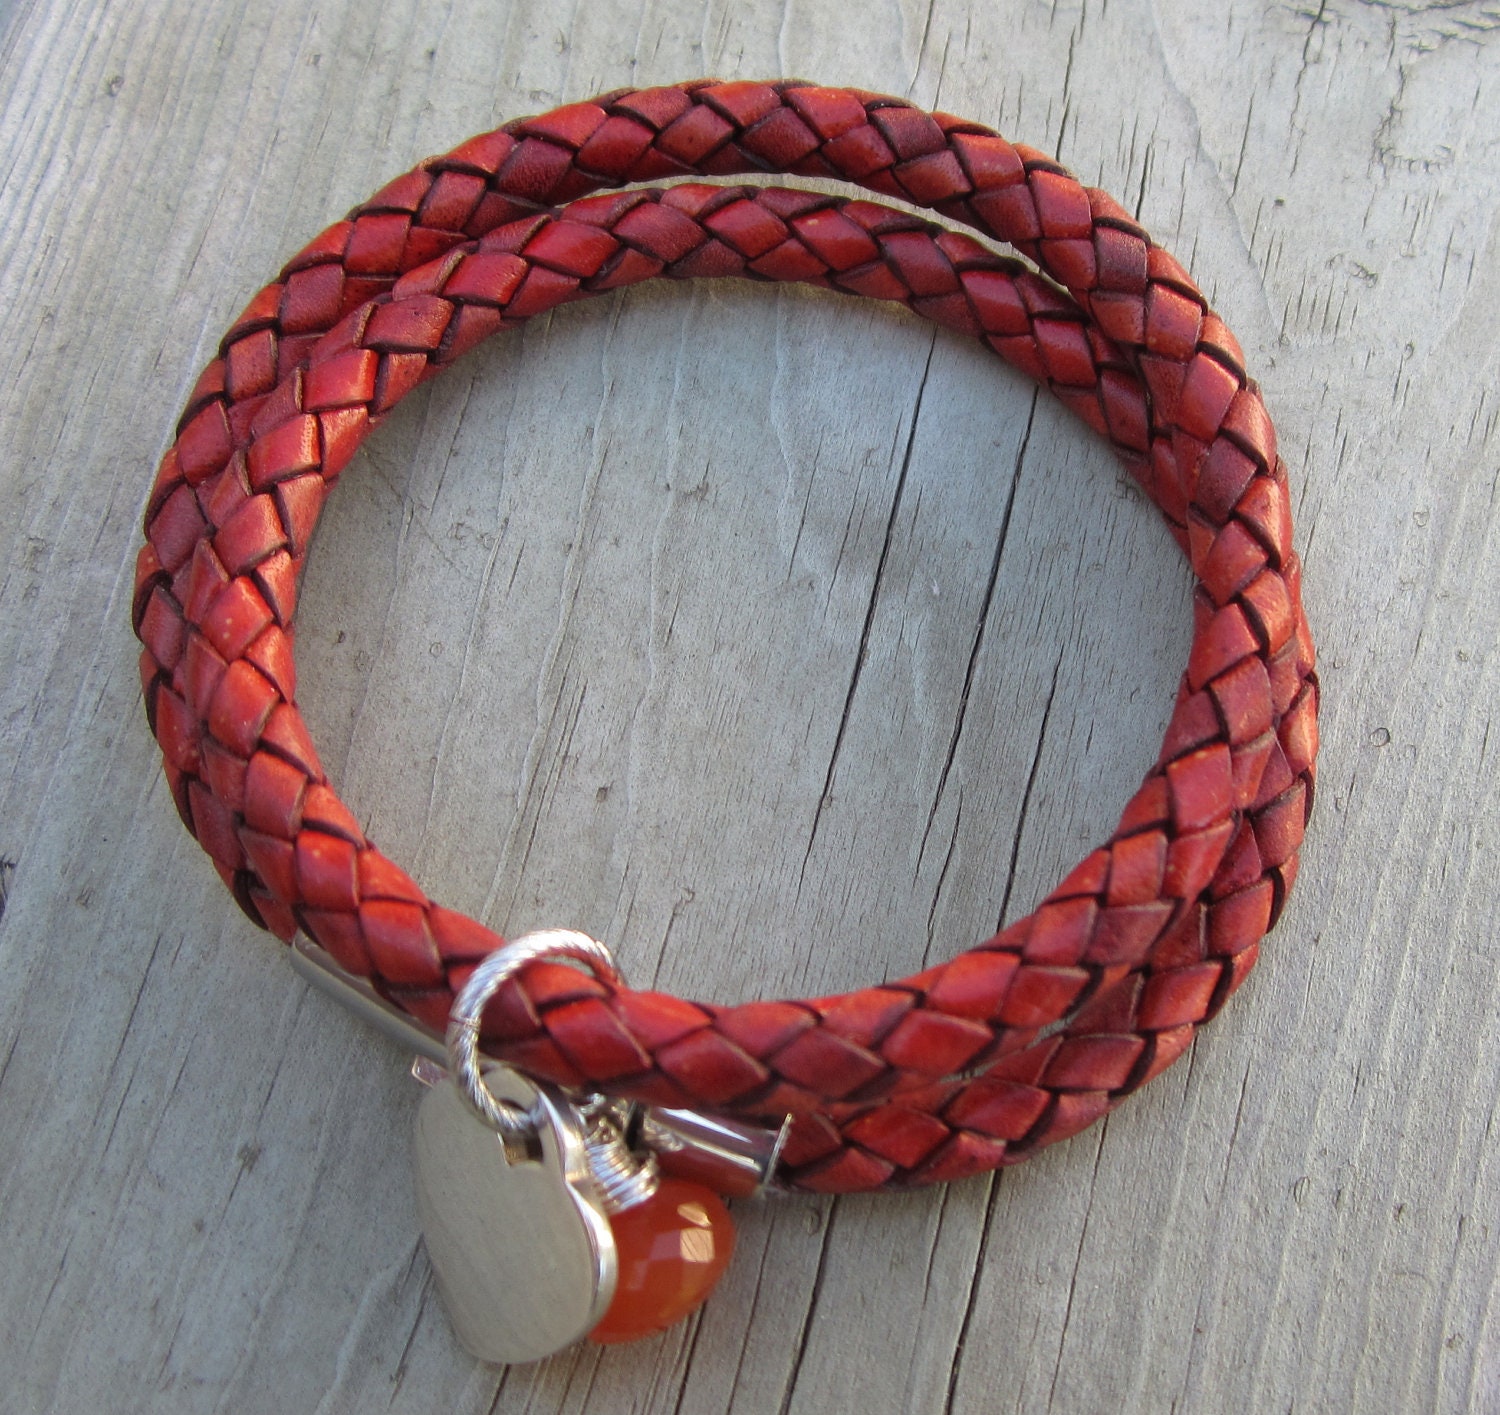 Rust Braided Leather Cord Bracelet. Double Wrap. Magnetic Closure. Autumn Fashons. Fall Trends. - LeanneDesigns